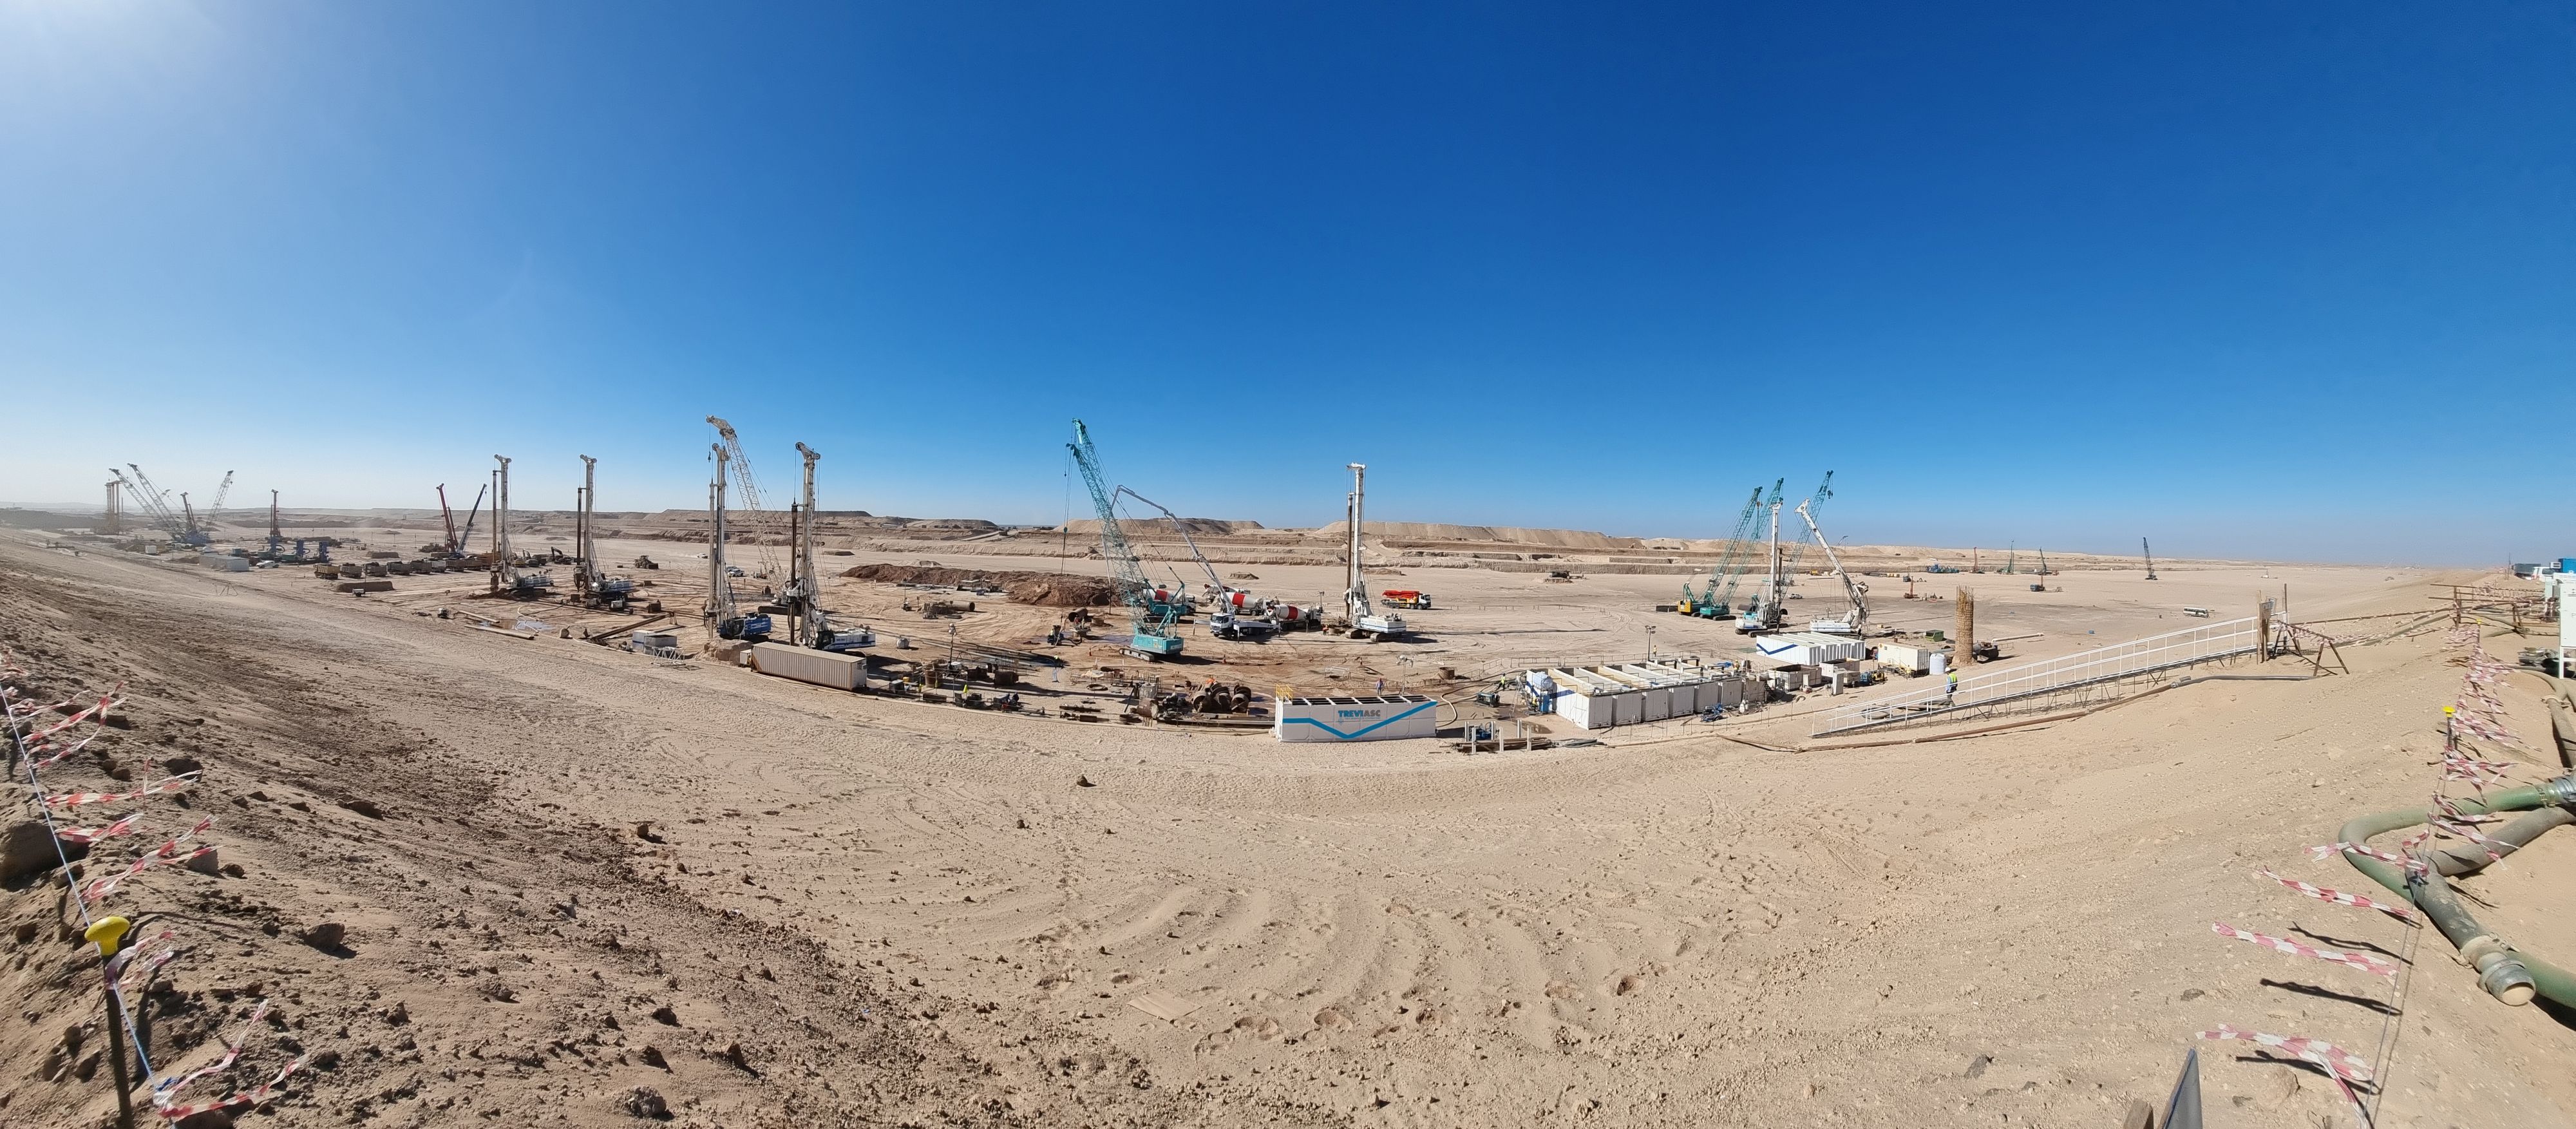 Trevi ASC at work in Saudi Arabia to create the foundations for the "The Line" Treviiicos